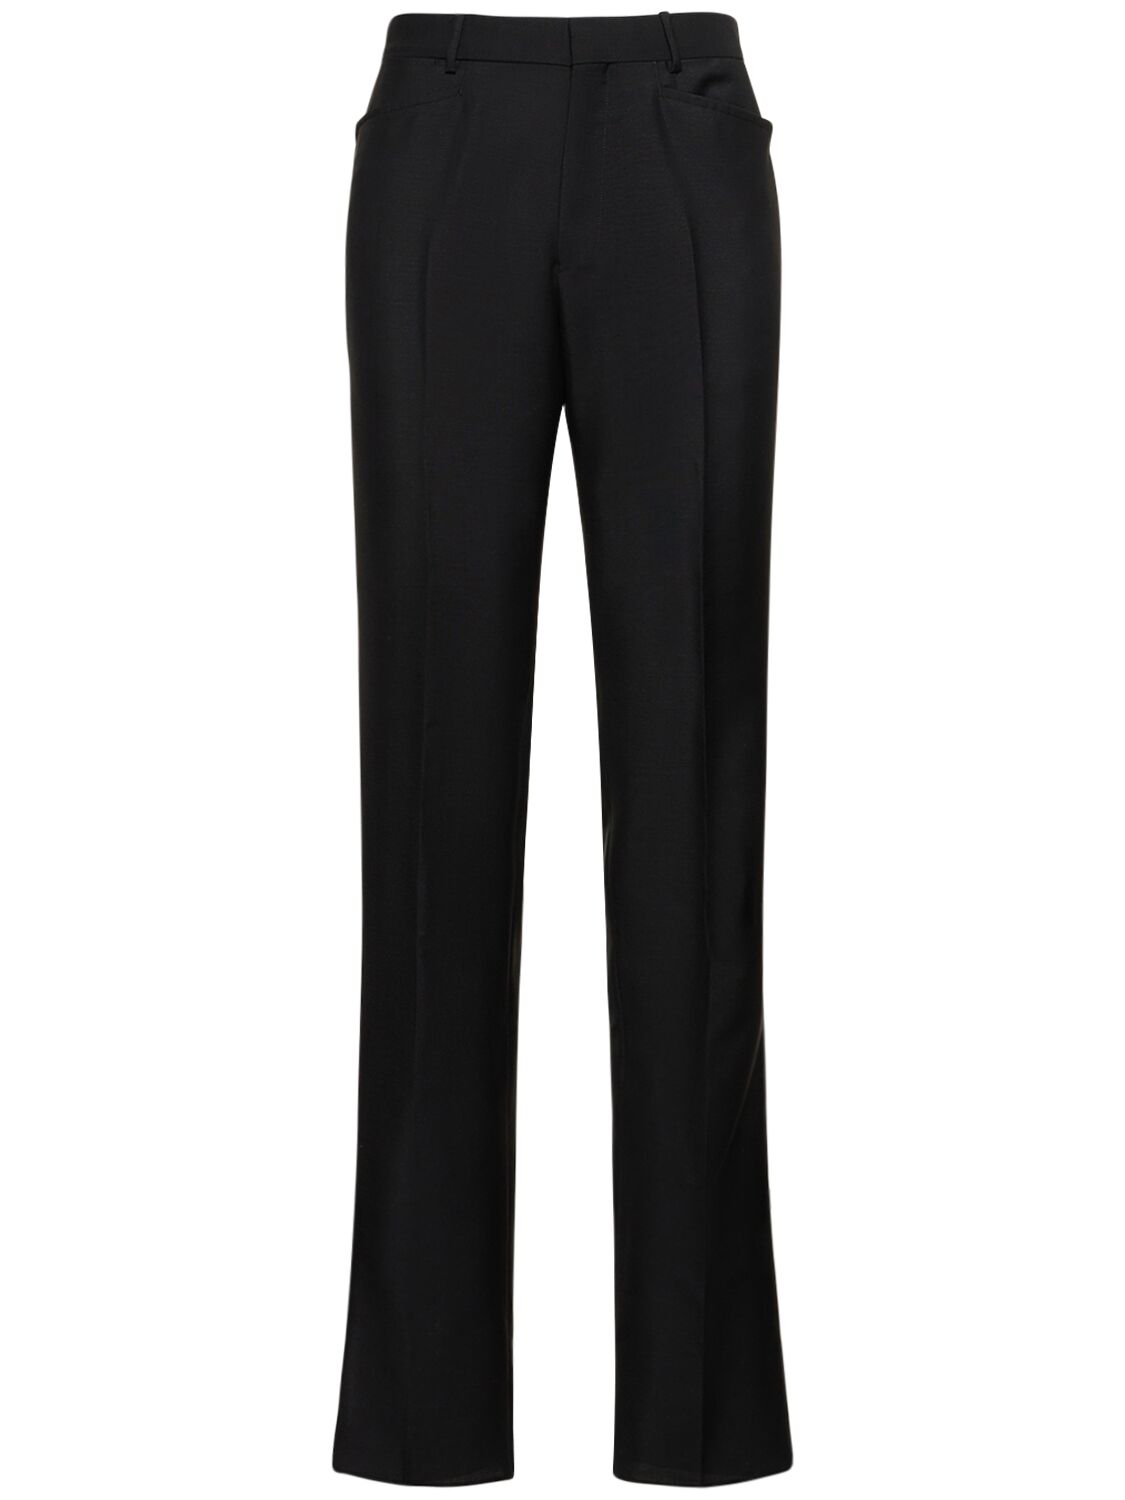 Tom Ford 23cm Atticus Mohair & Wool Trousers In Black